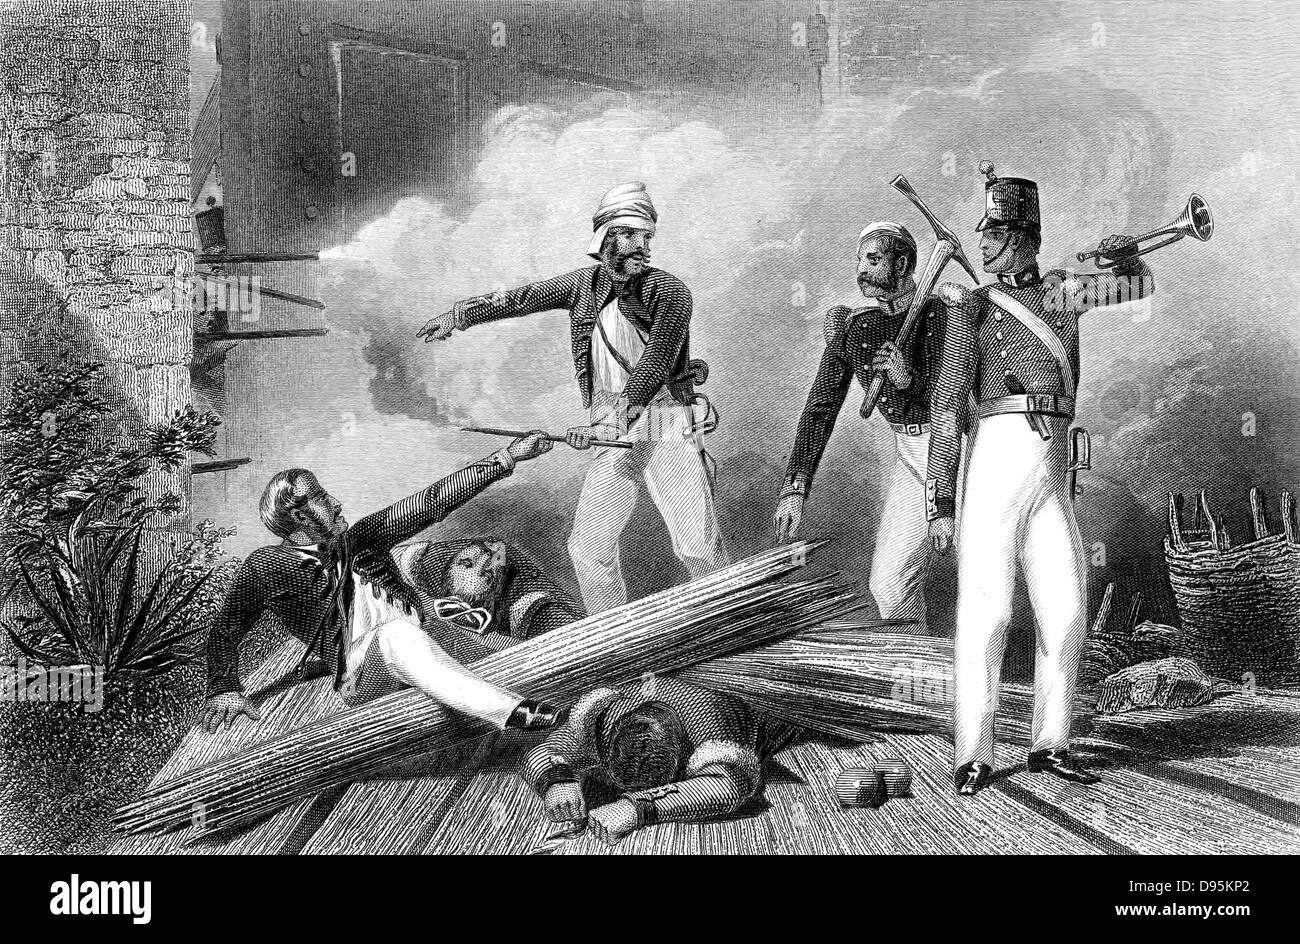 Indian Mutiny 1857-1859, also known as the Sepoy Mutiny or the Great War of Independence: blowing up of the Cashmere Gate, Delhi. Shot through arm and leg, Lieutenant Salkeld hands aslow match to Corporal Burgess who was mortally wounded just after lighting charge. Engraving. Stock Photo